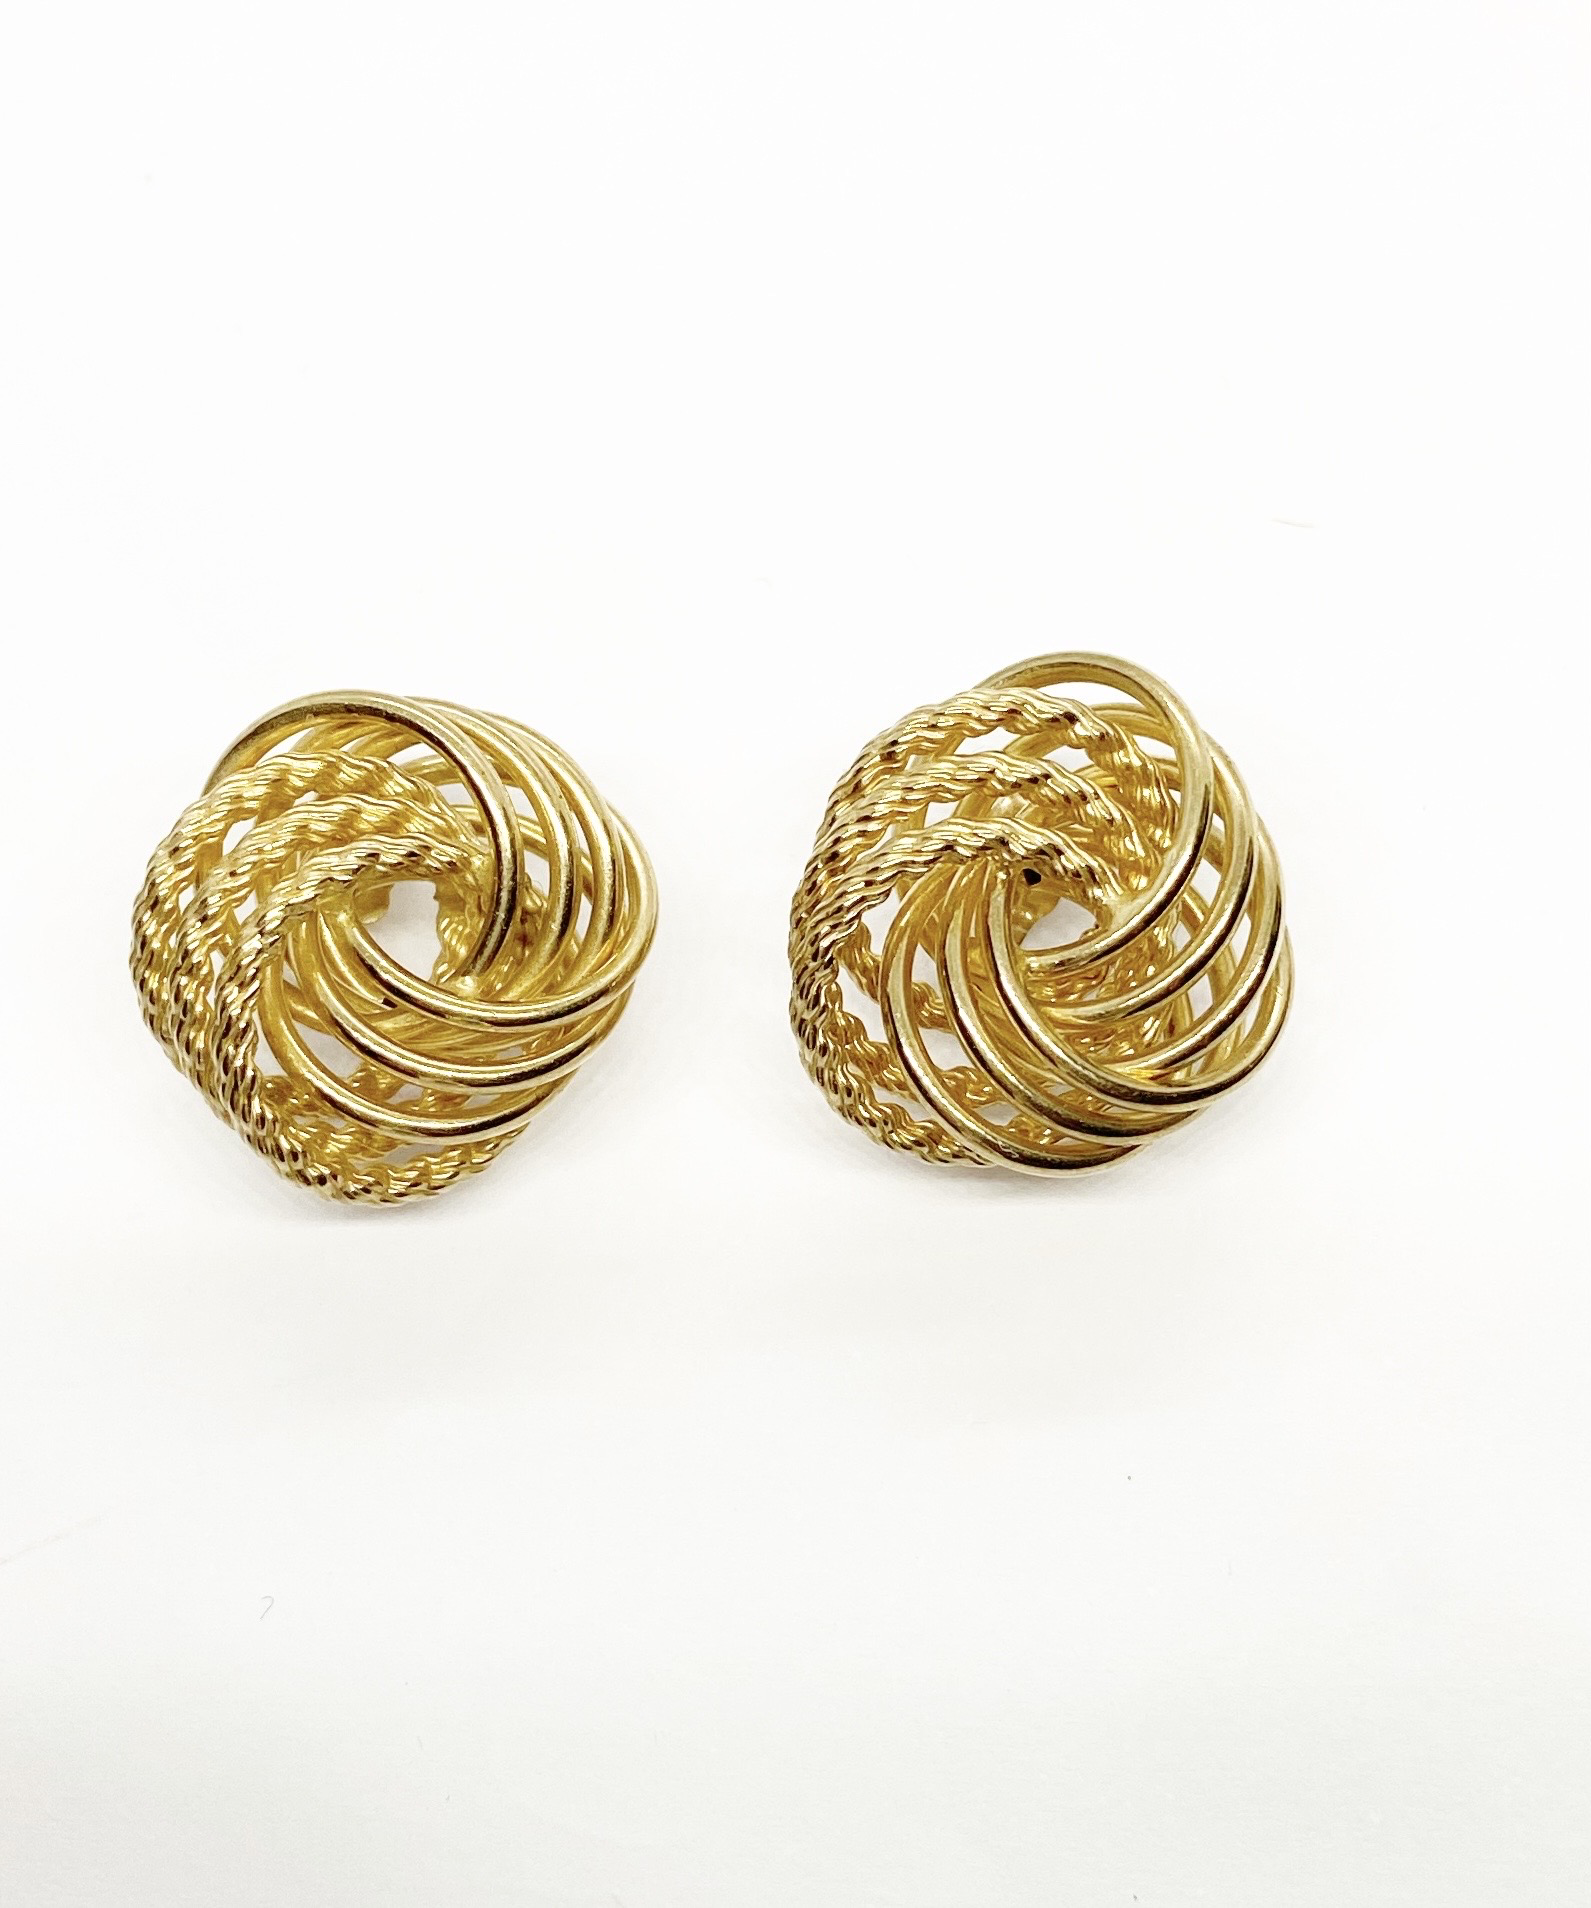 9ct Gold Large Knot Earrings